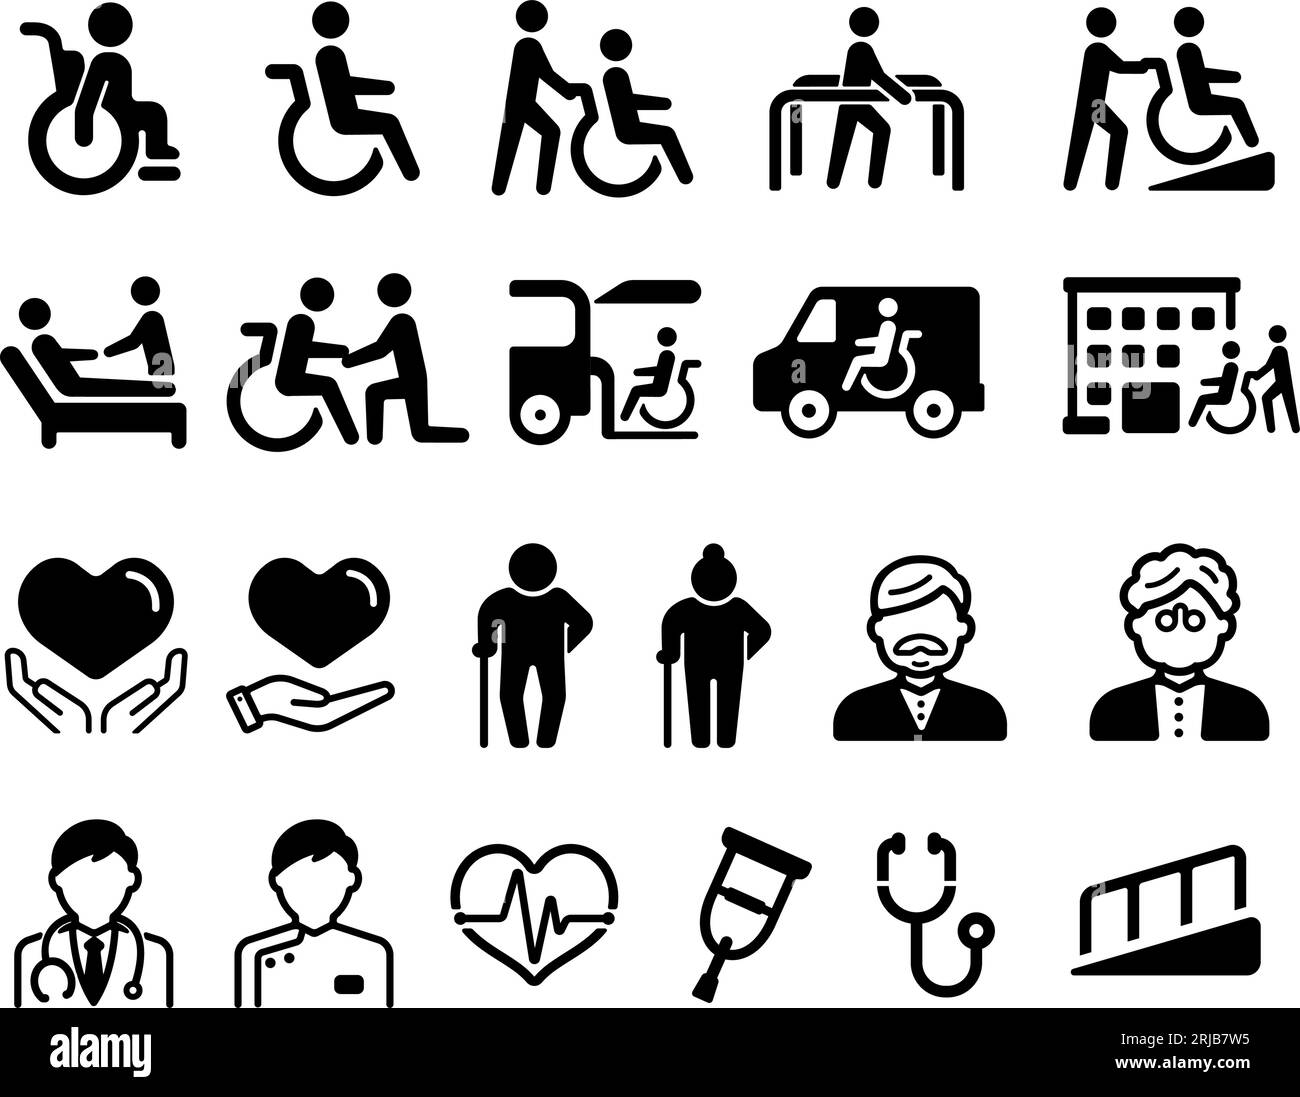 Vector icon illustrations set related to welfare for the elderly, people with disabilities etc. Stock Vector